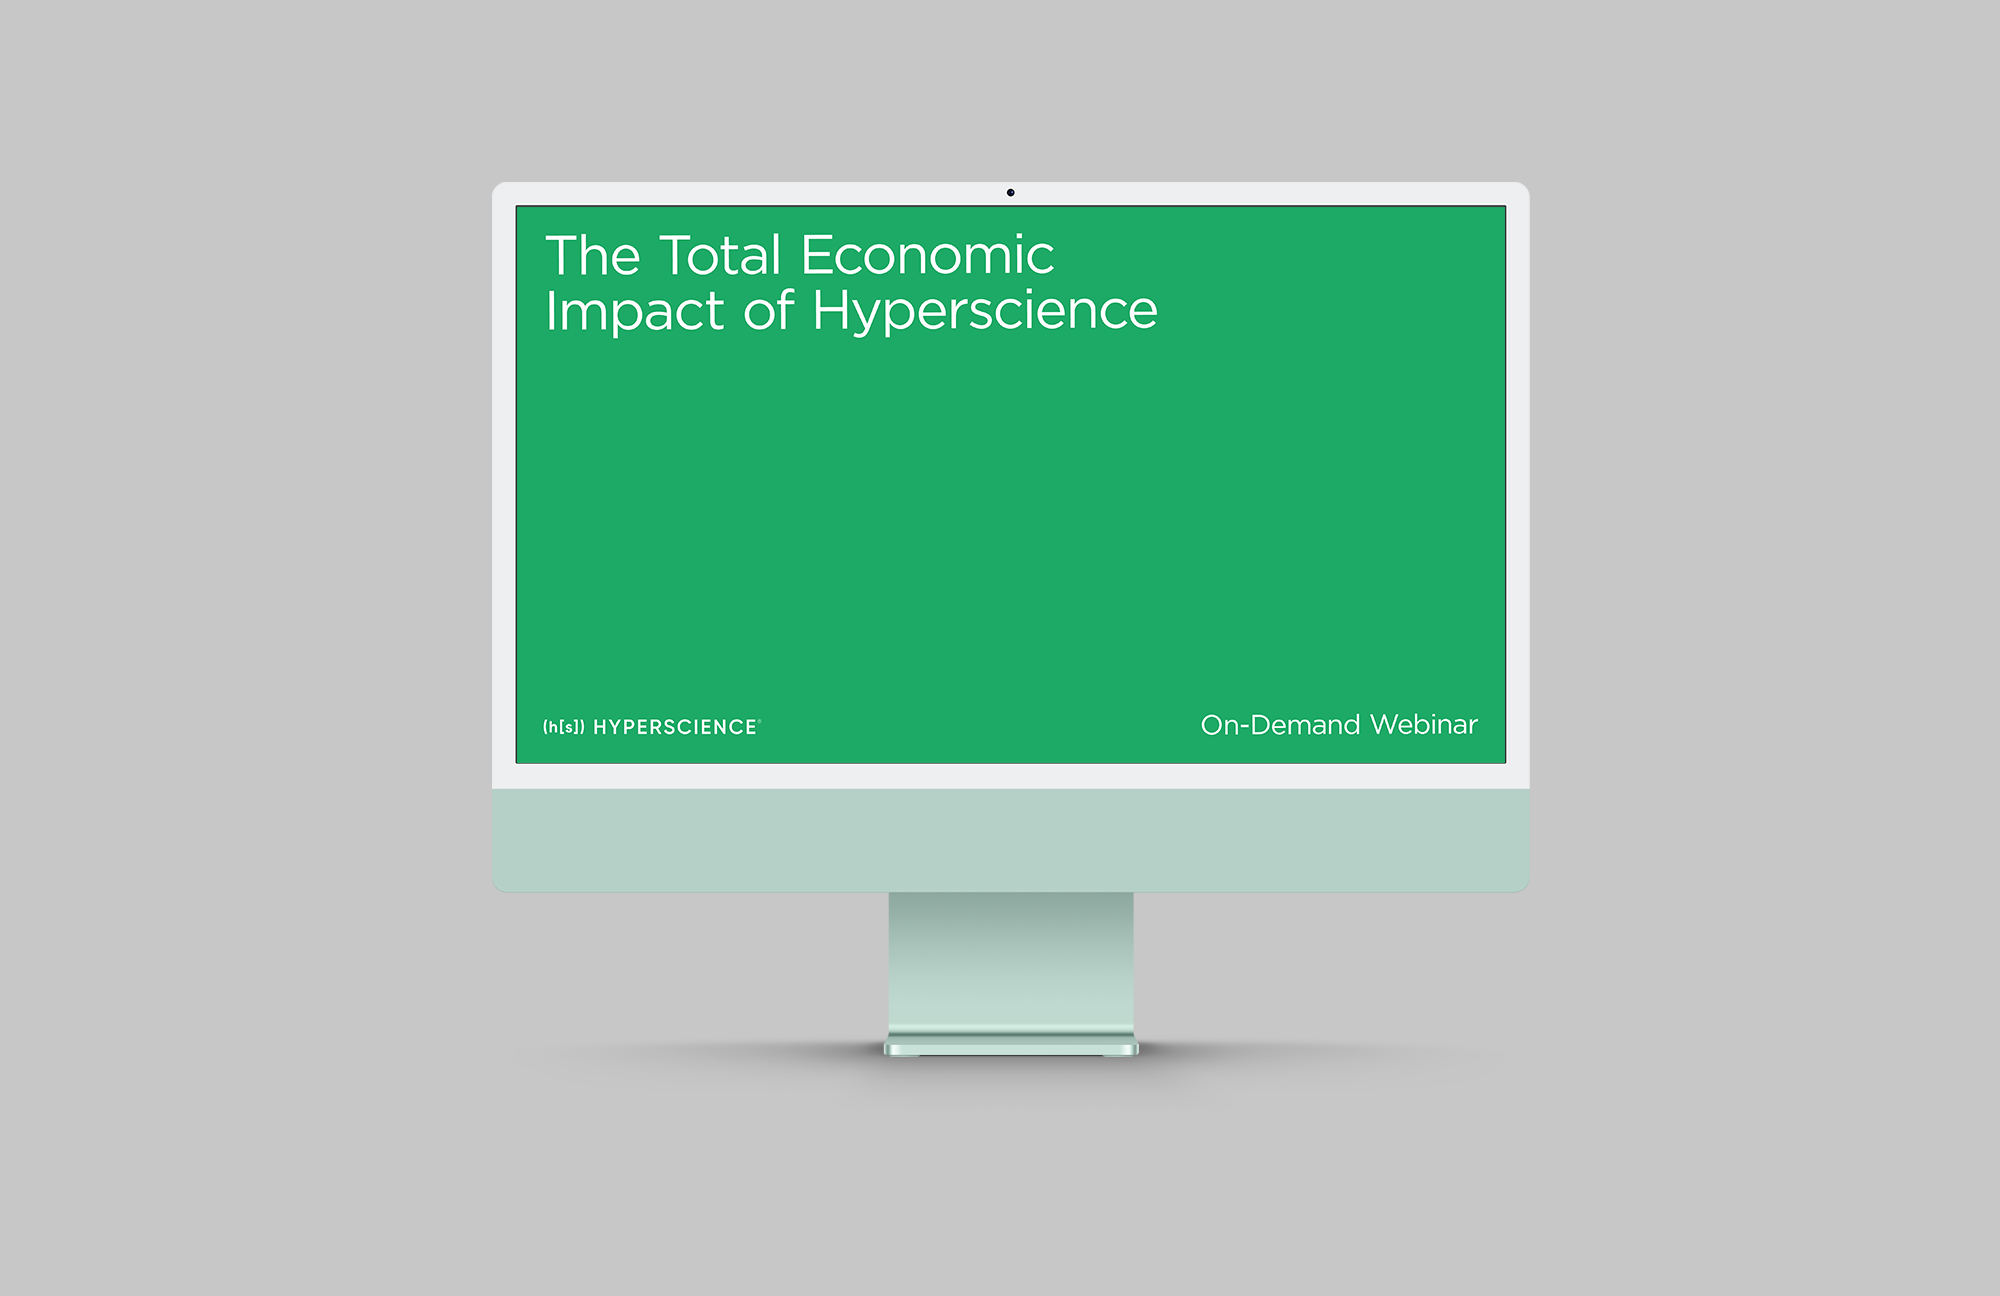 The Total Economic Impact of Hyperscience